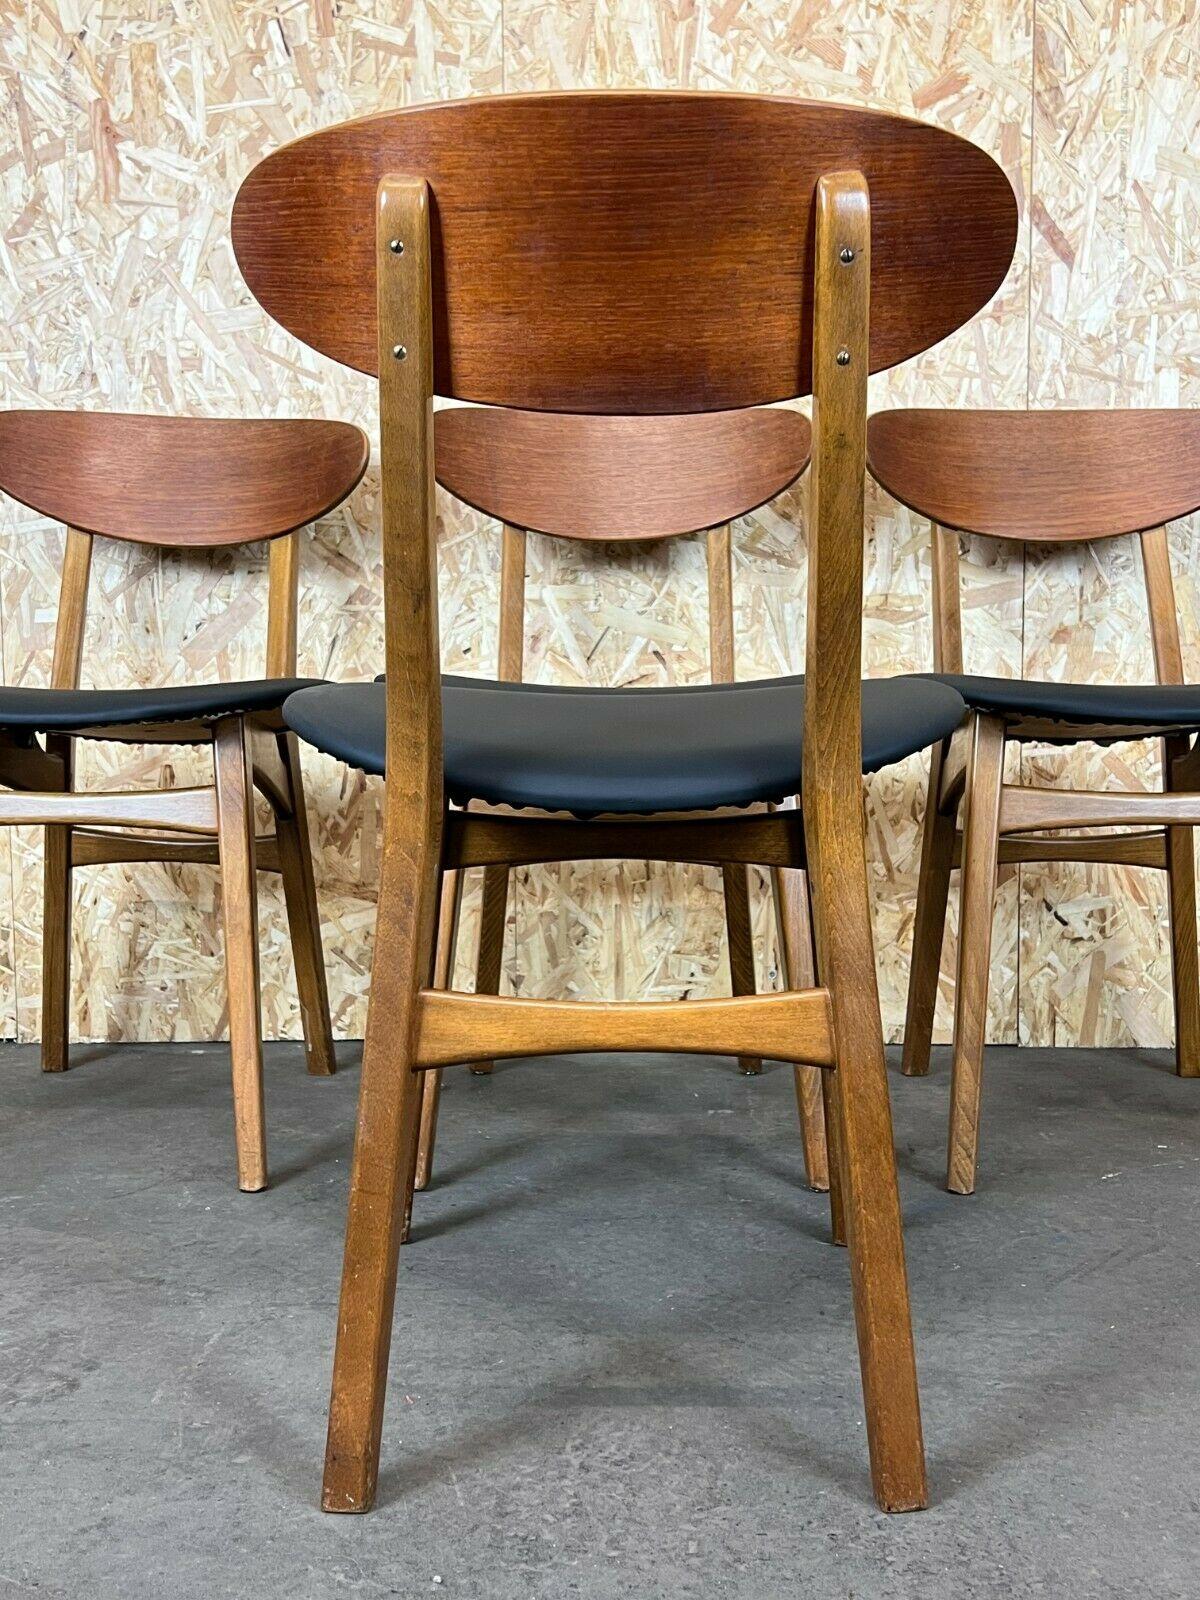 4x 60s 70s Teak Chairs Dining Chair Danish Modern Design 60s For Sale 1